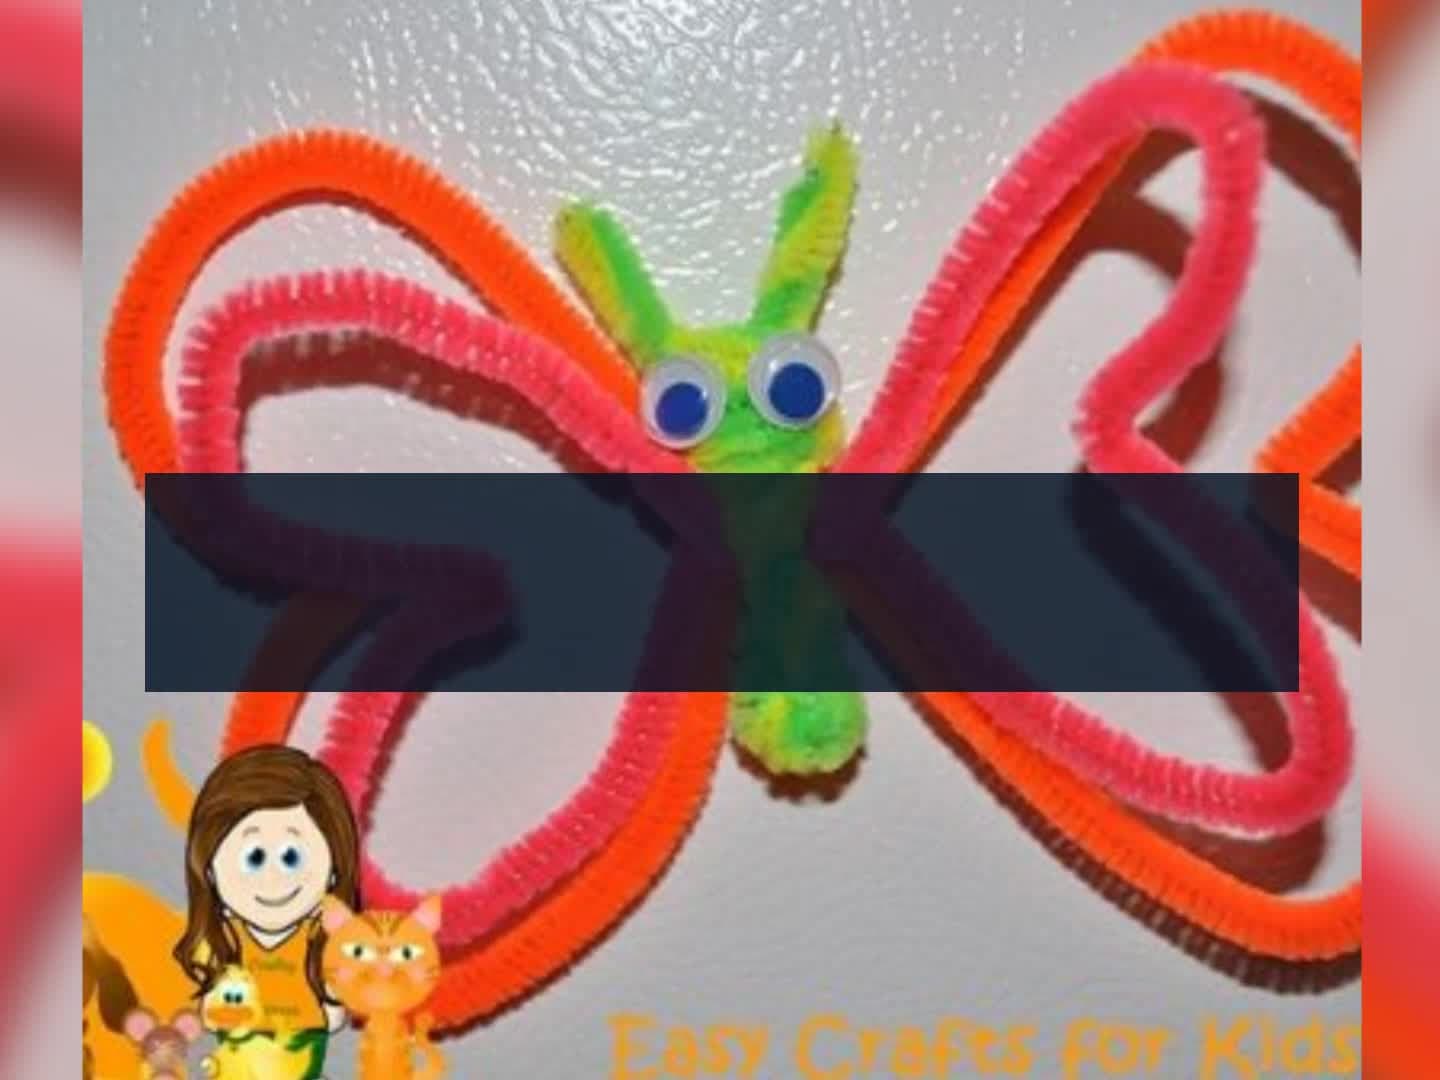 Easy Yarn Crafts For Kids  How To Make A Yarn Octopus 